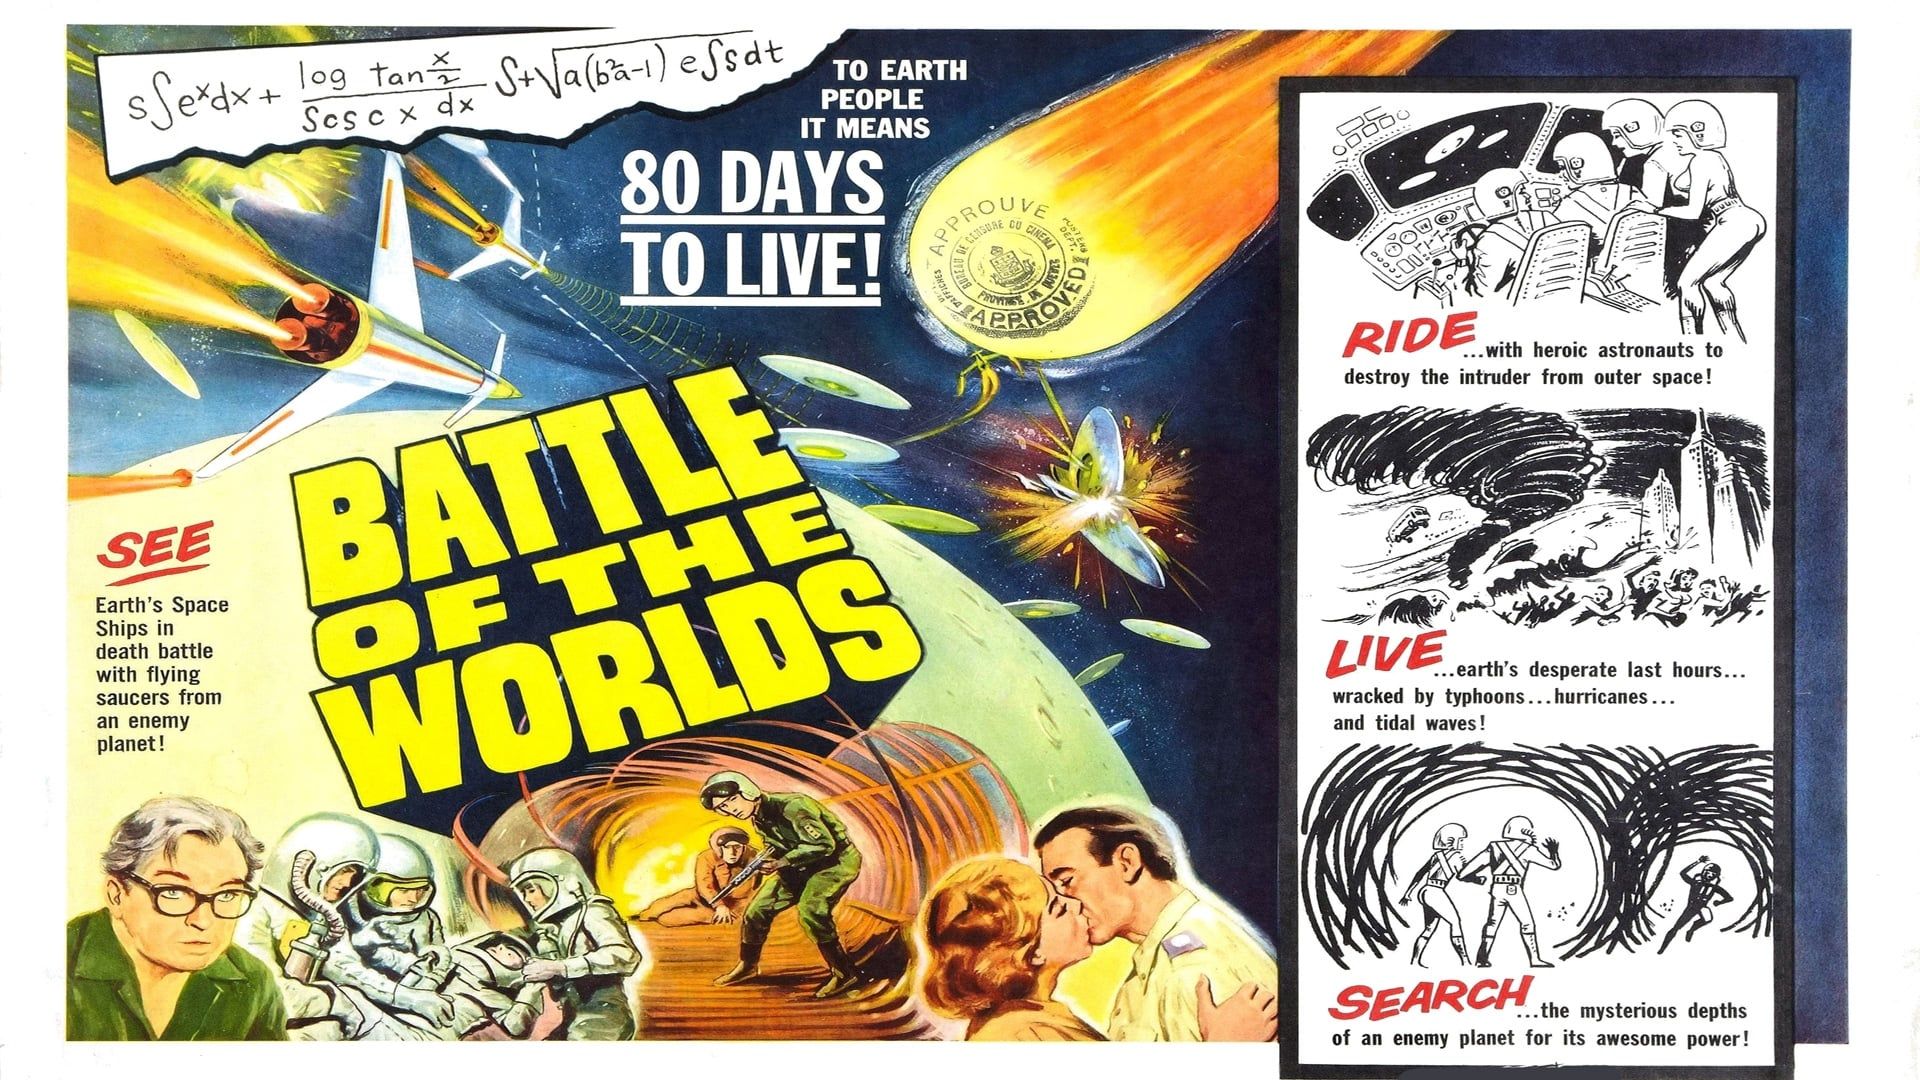 Battle of the Worlds background